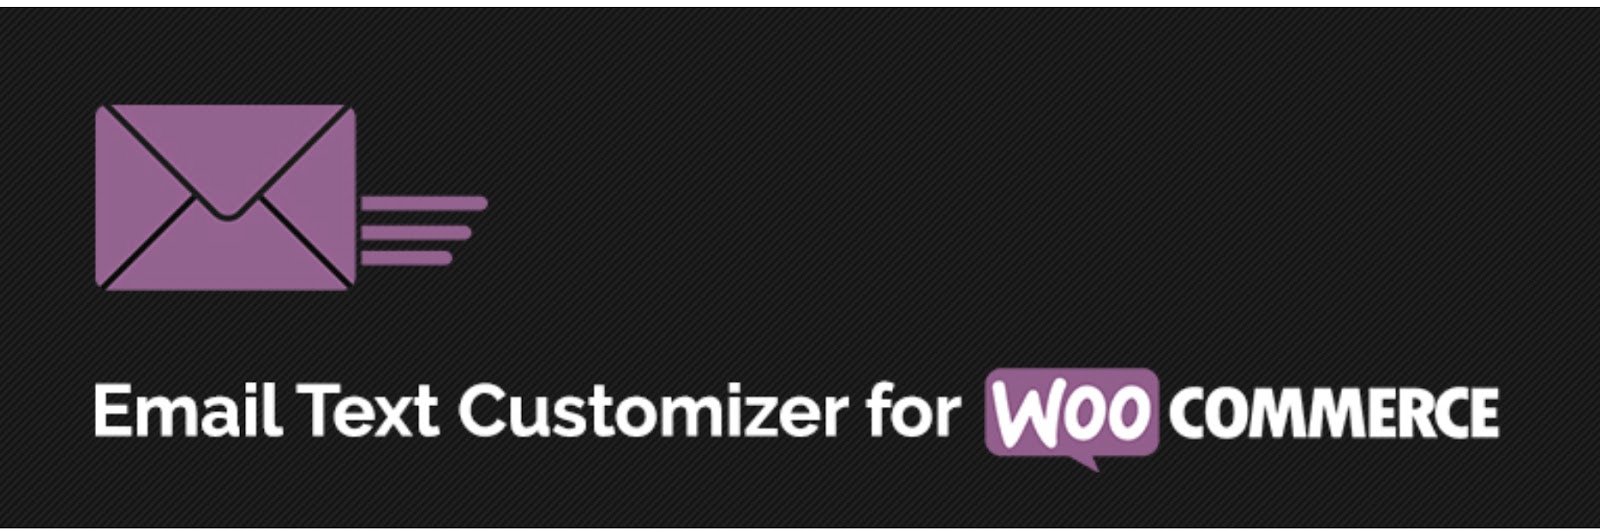 Email Text Customizer for WooCommerce